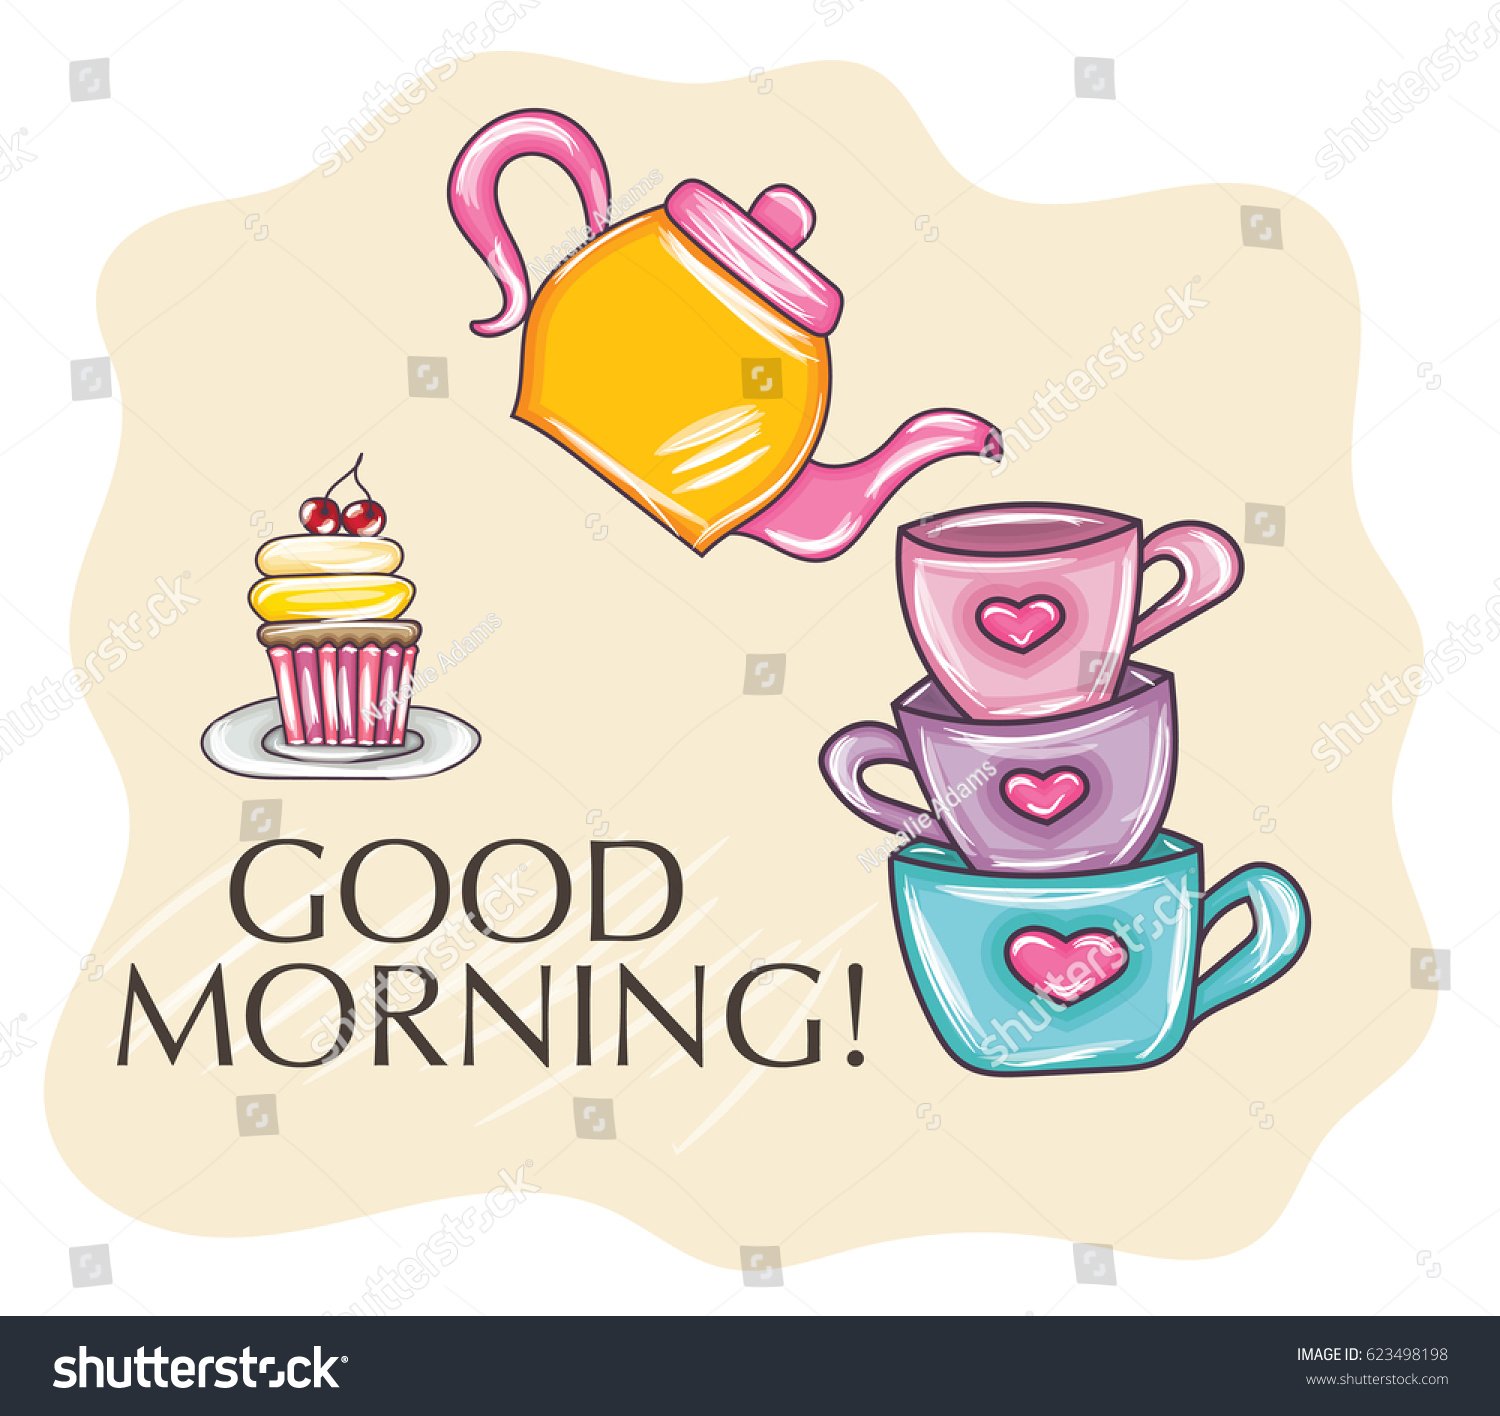 Good Morning Hand Draw Greeting Card Stock Vector 623498198 - Shutterstock